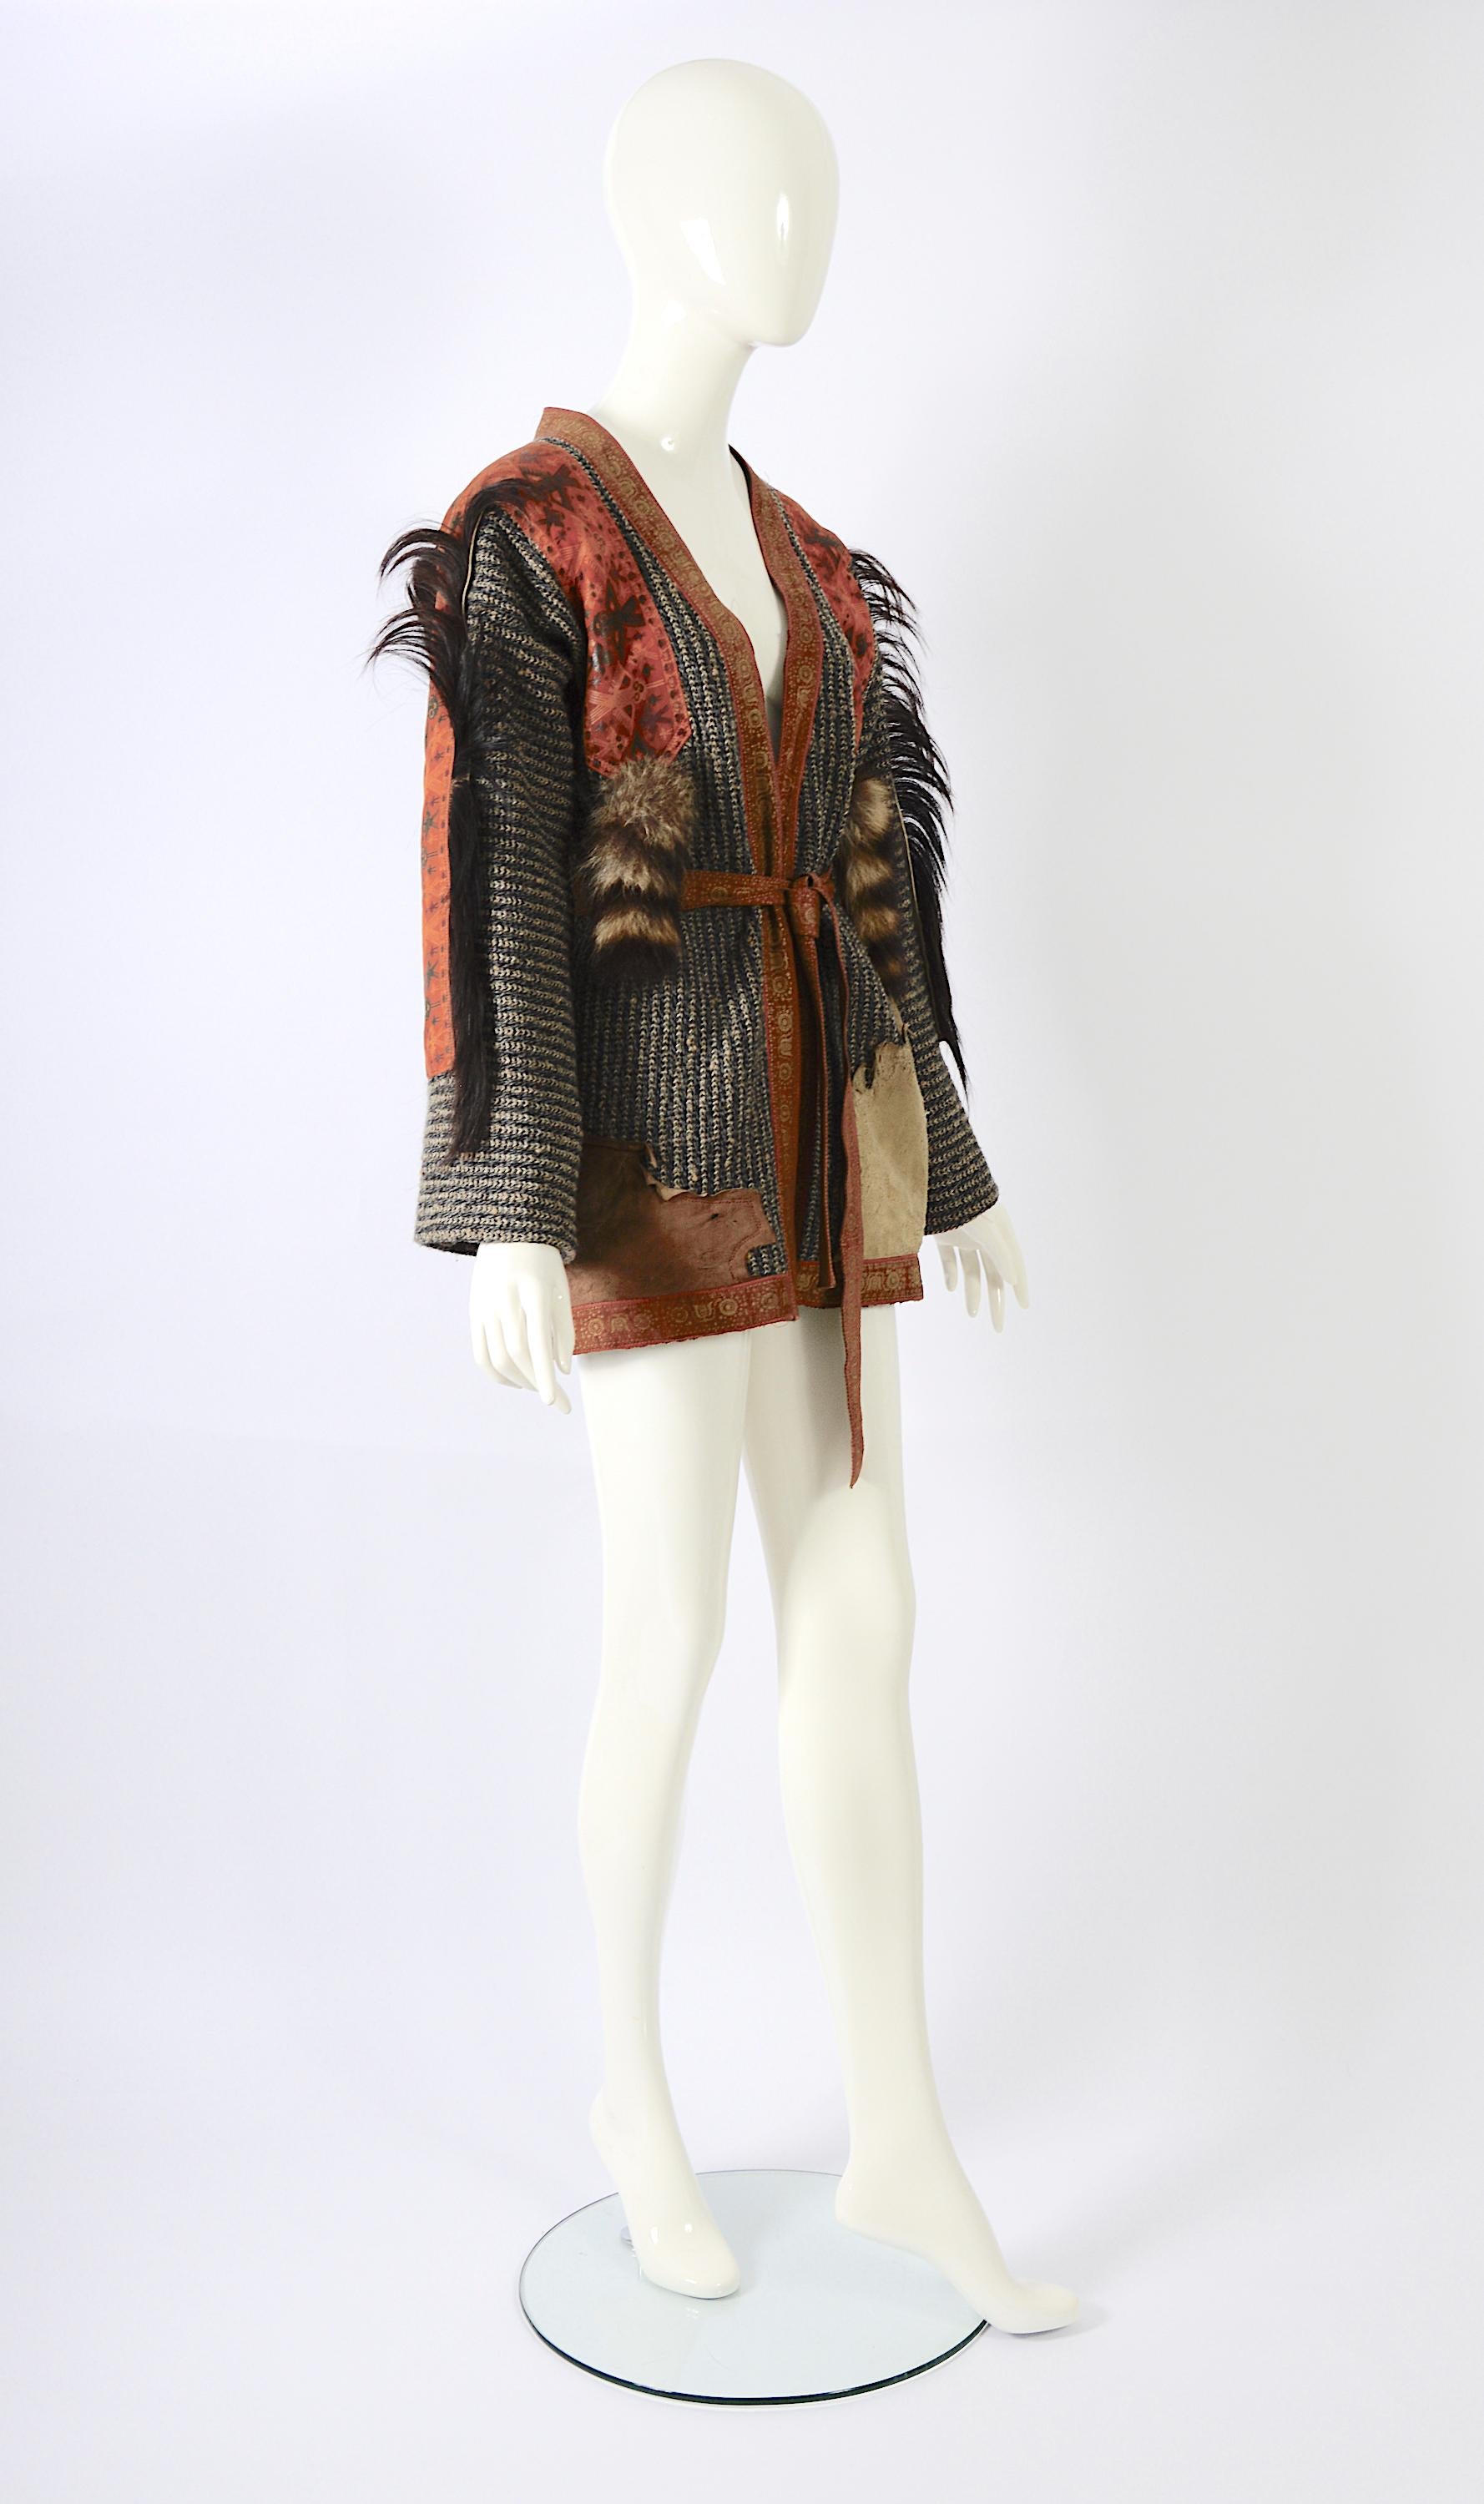 Roberto Cavalli Museum-Worthy 1971 Patchwork Debut Collection Vintage Jacket  For Sale 5